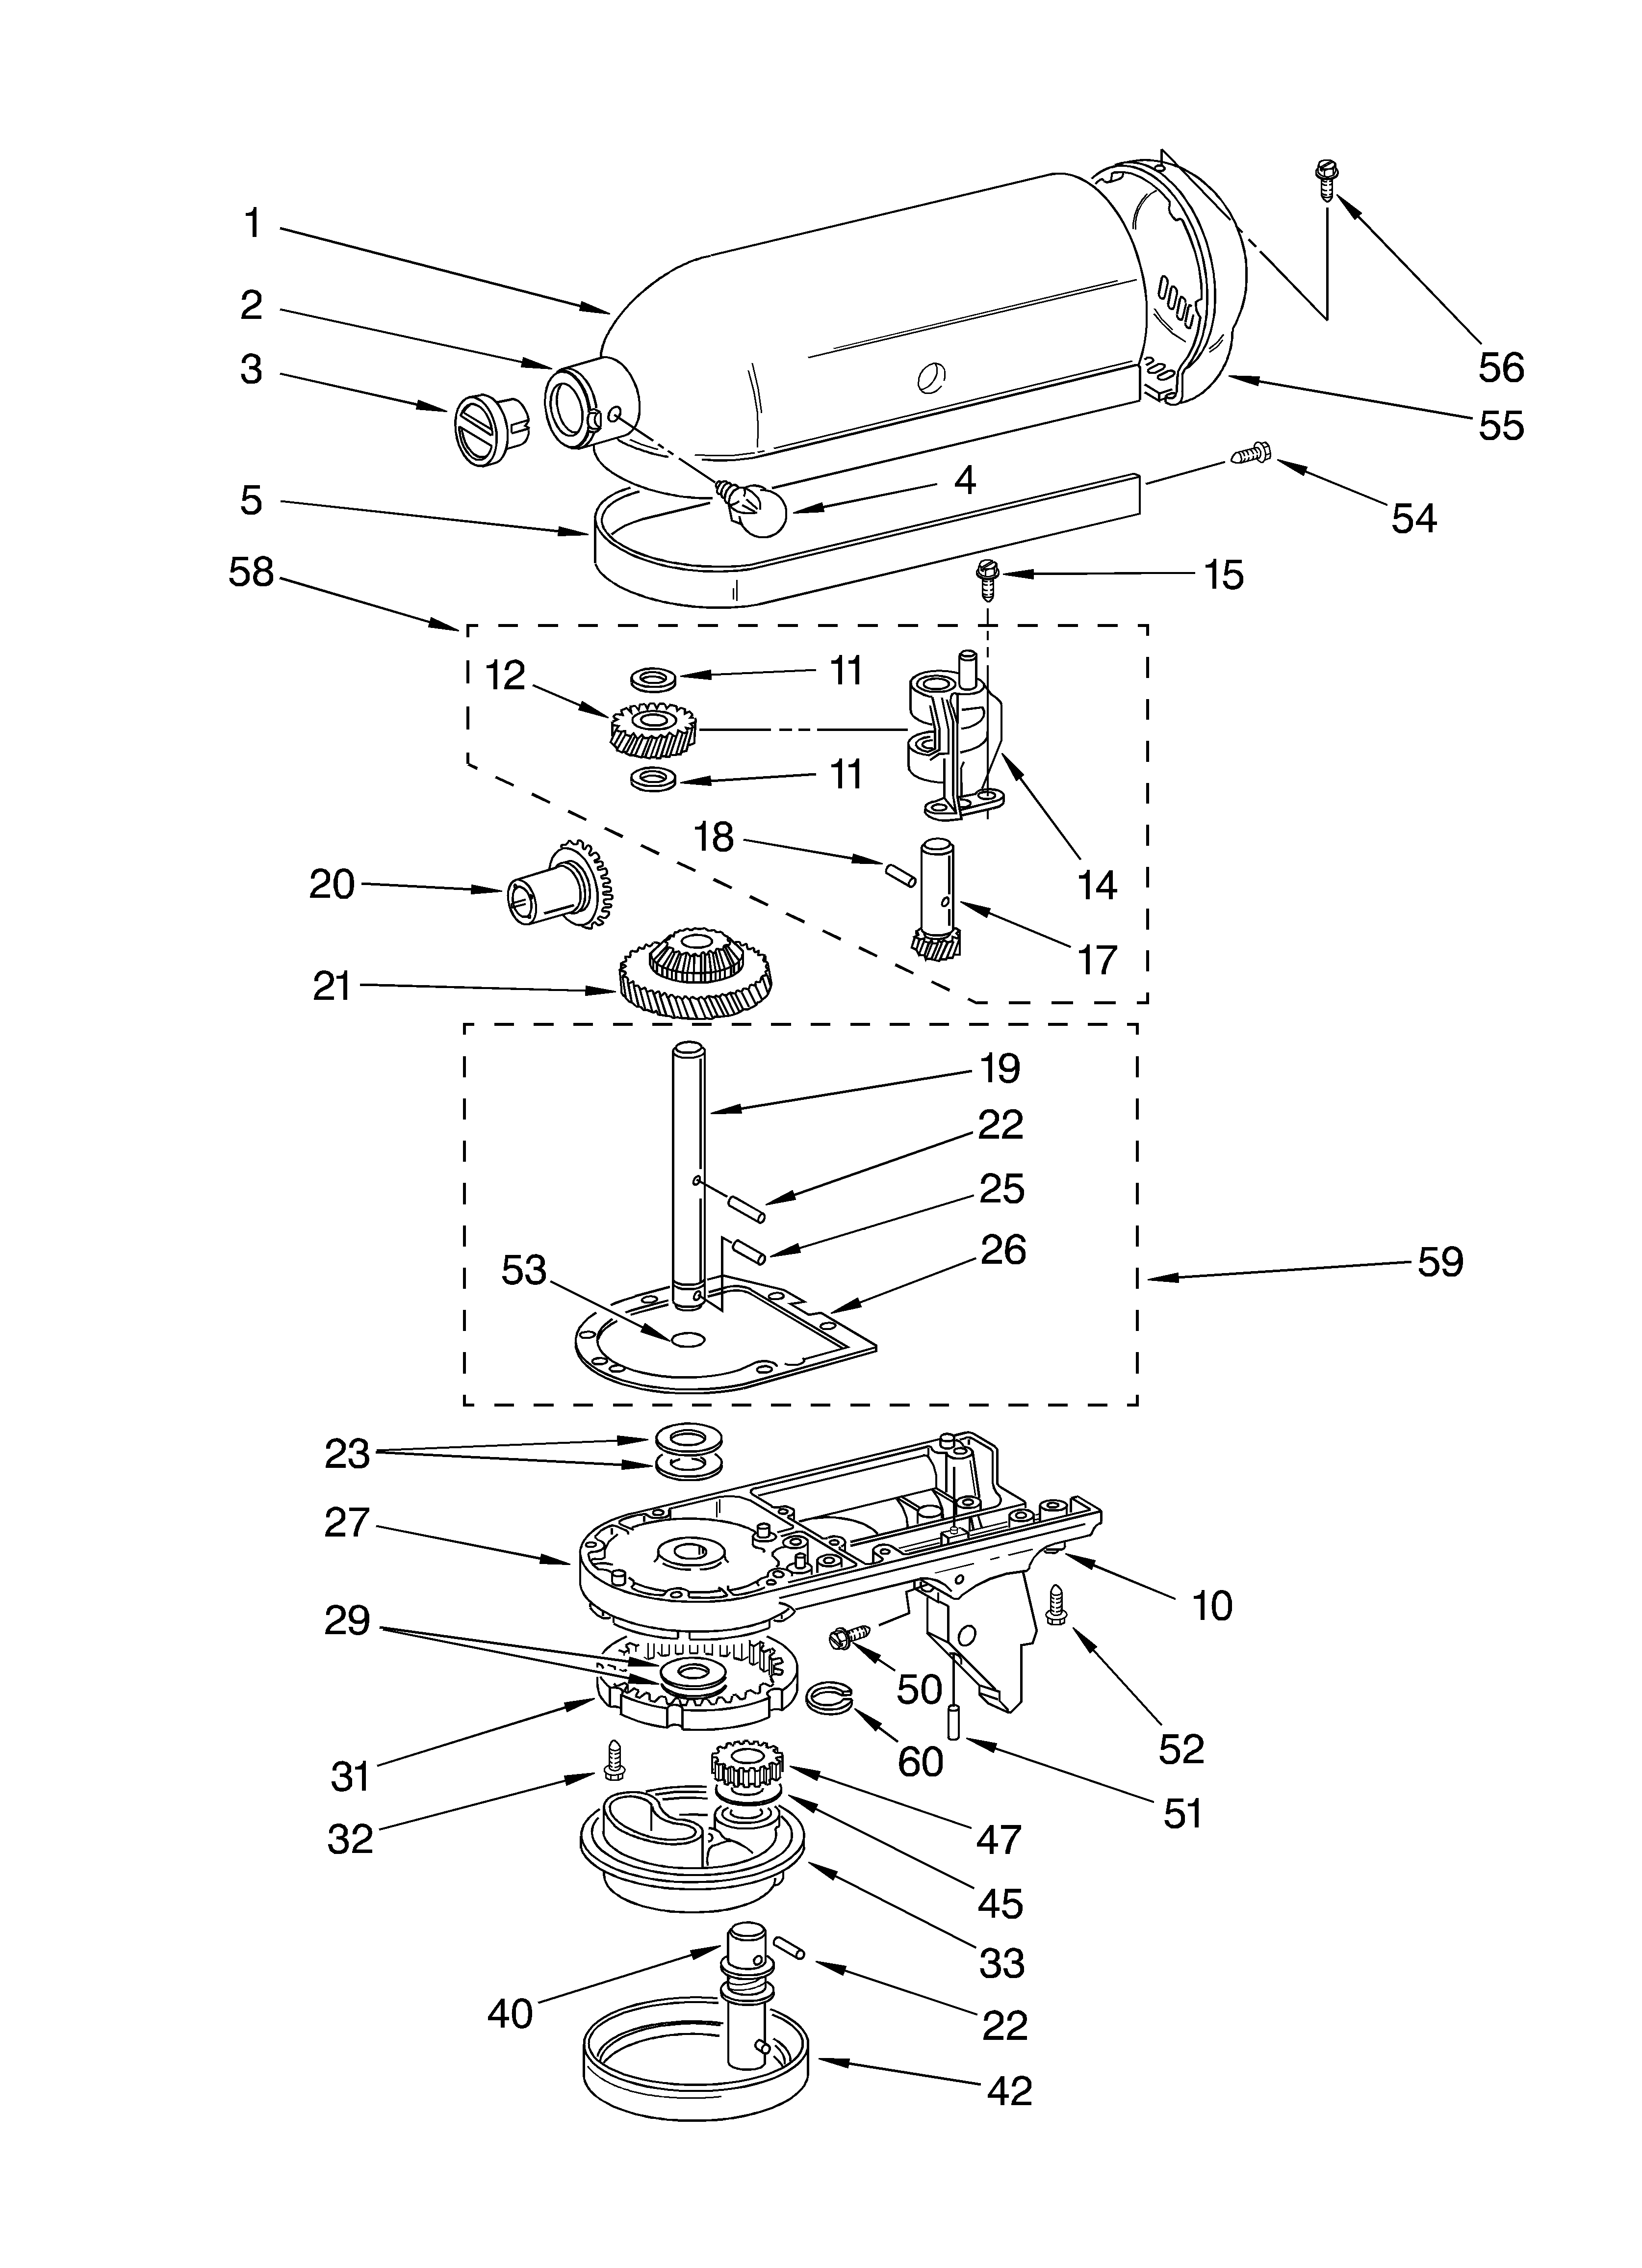 https://www.genuinereplacementparts.com/images/diagram/ksm150-case-gearing-and-planetary-unit.png